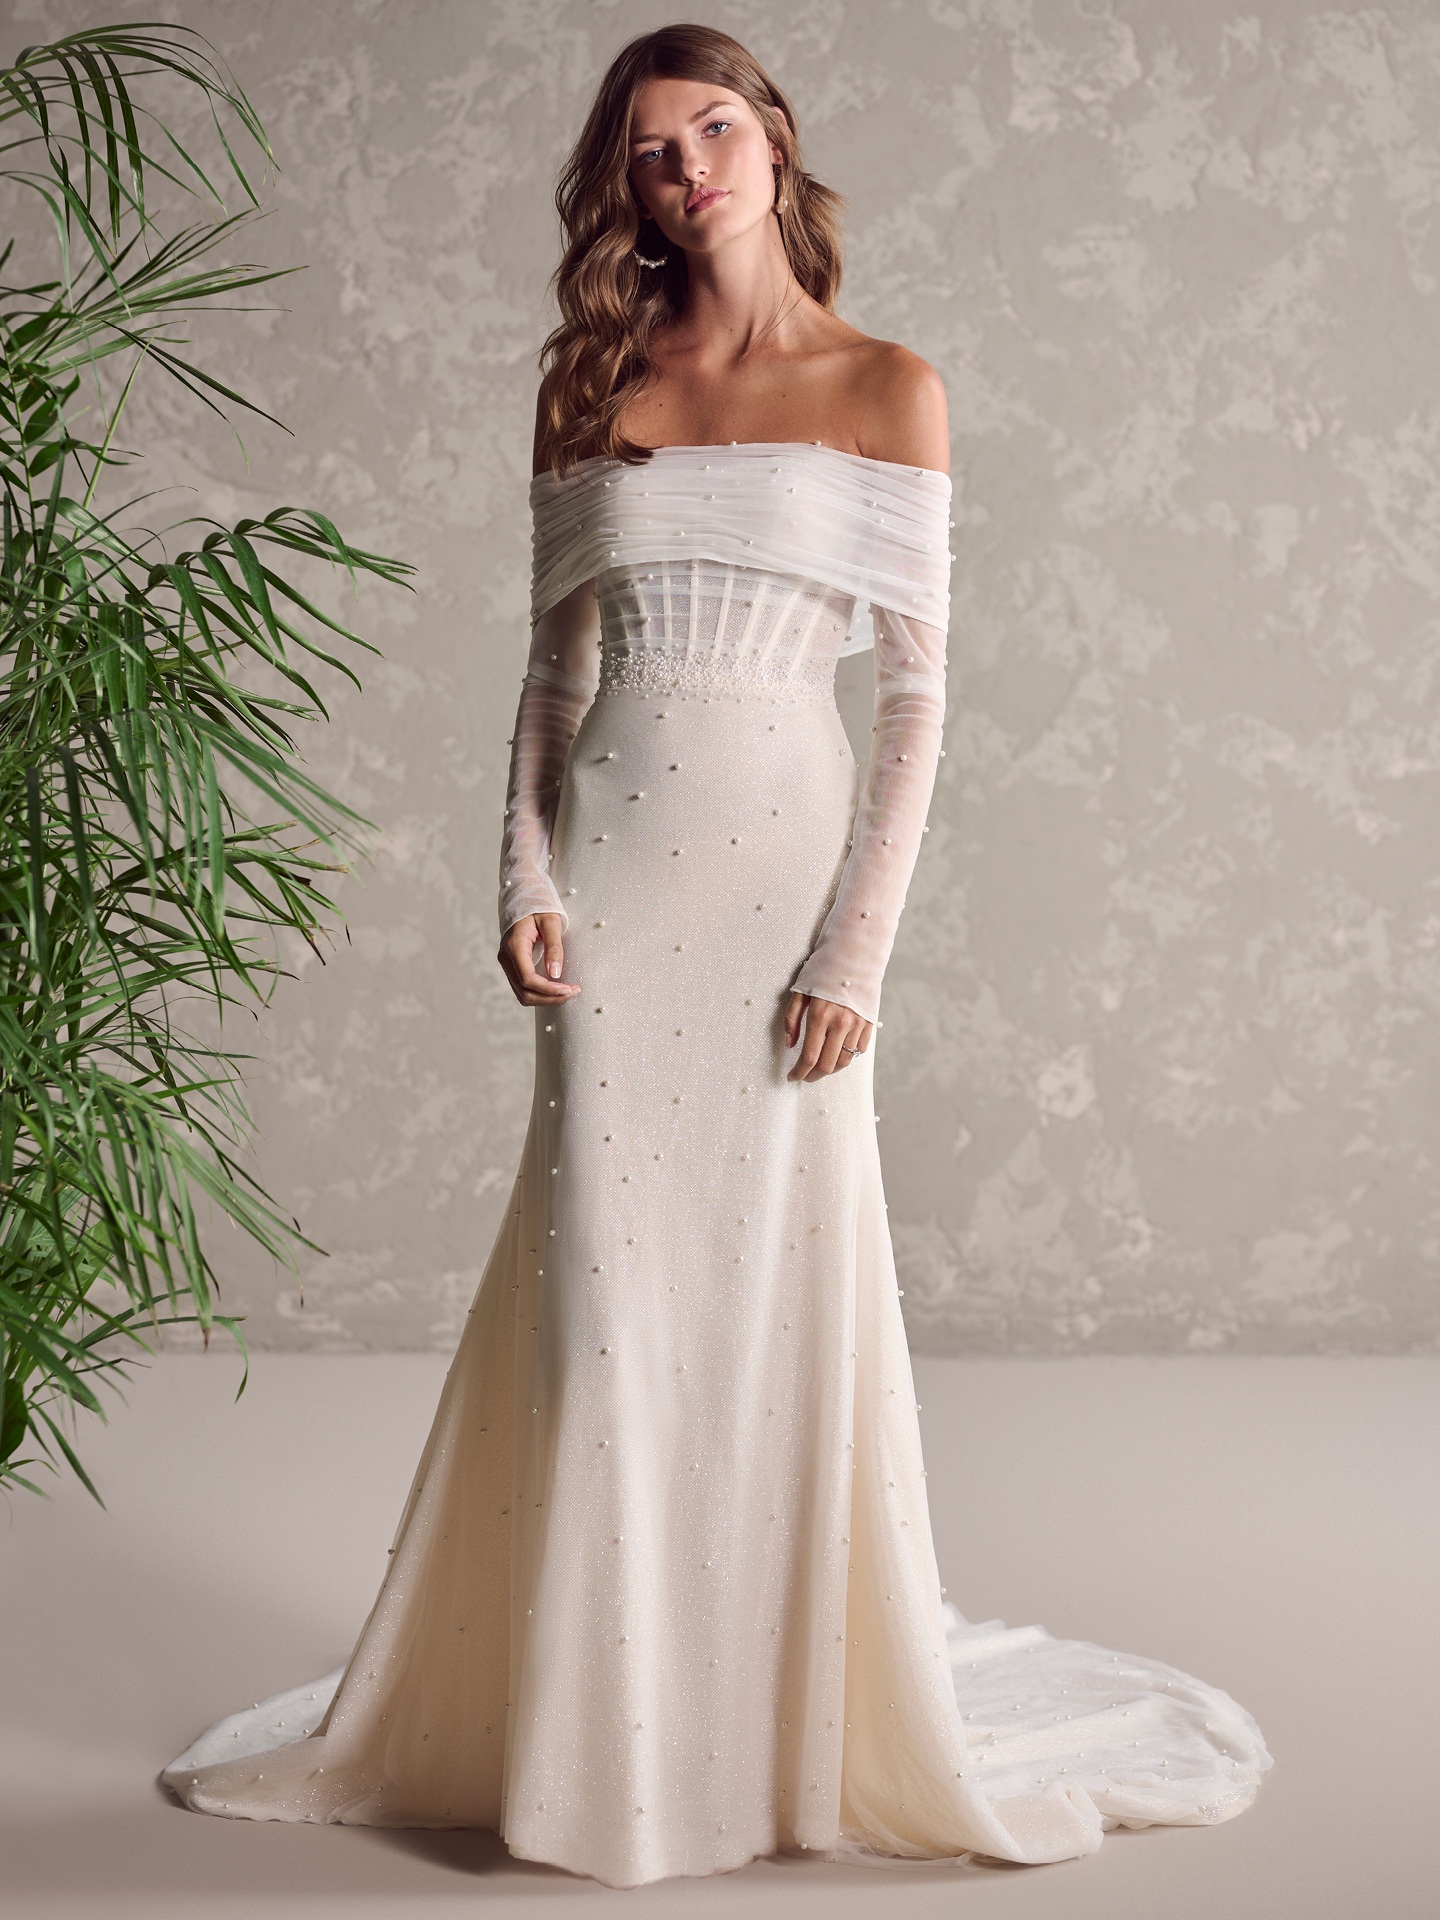 High - Maggie-Sottero-Drew-Marie-Fit-and-Flare-Wedding-Dress-23MB724B01-Alt53-BLS